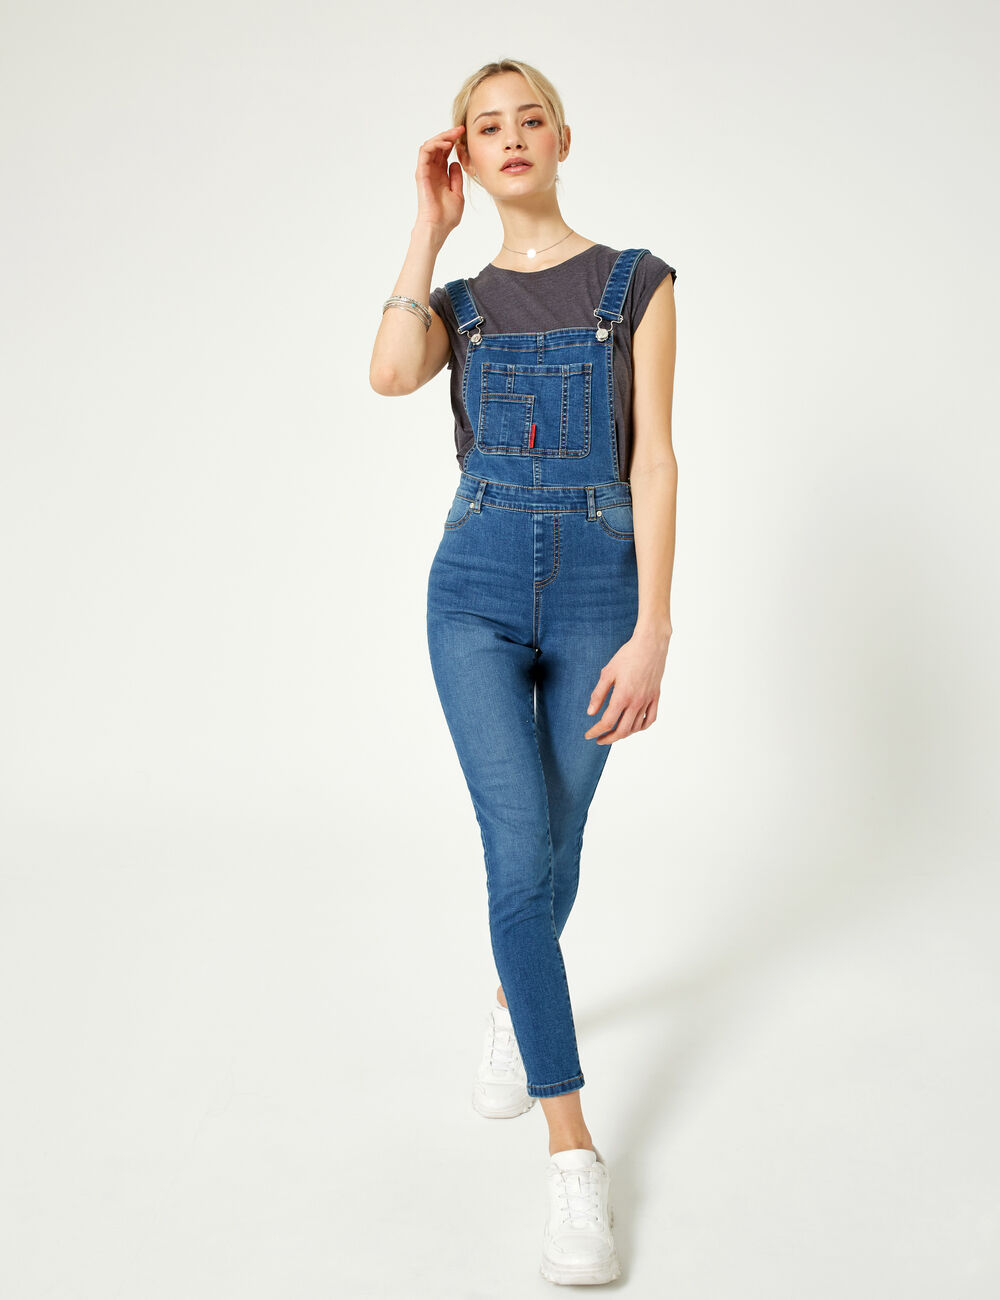 jean dungarees